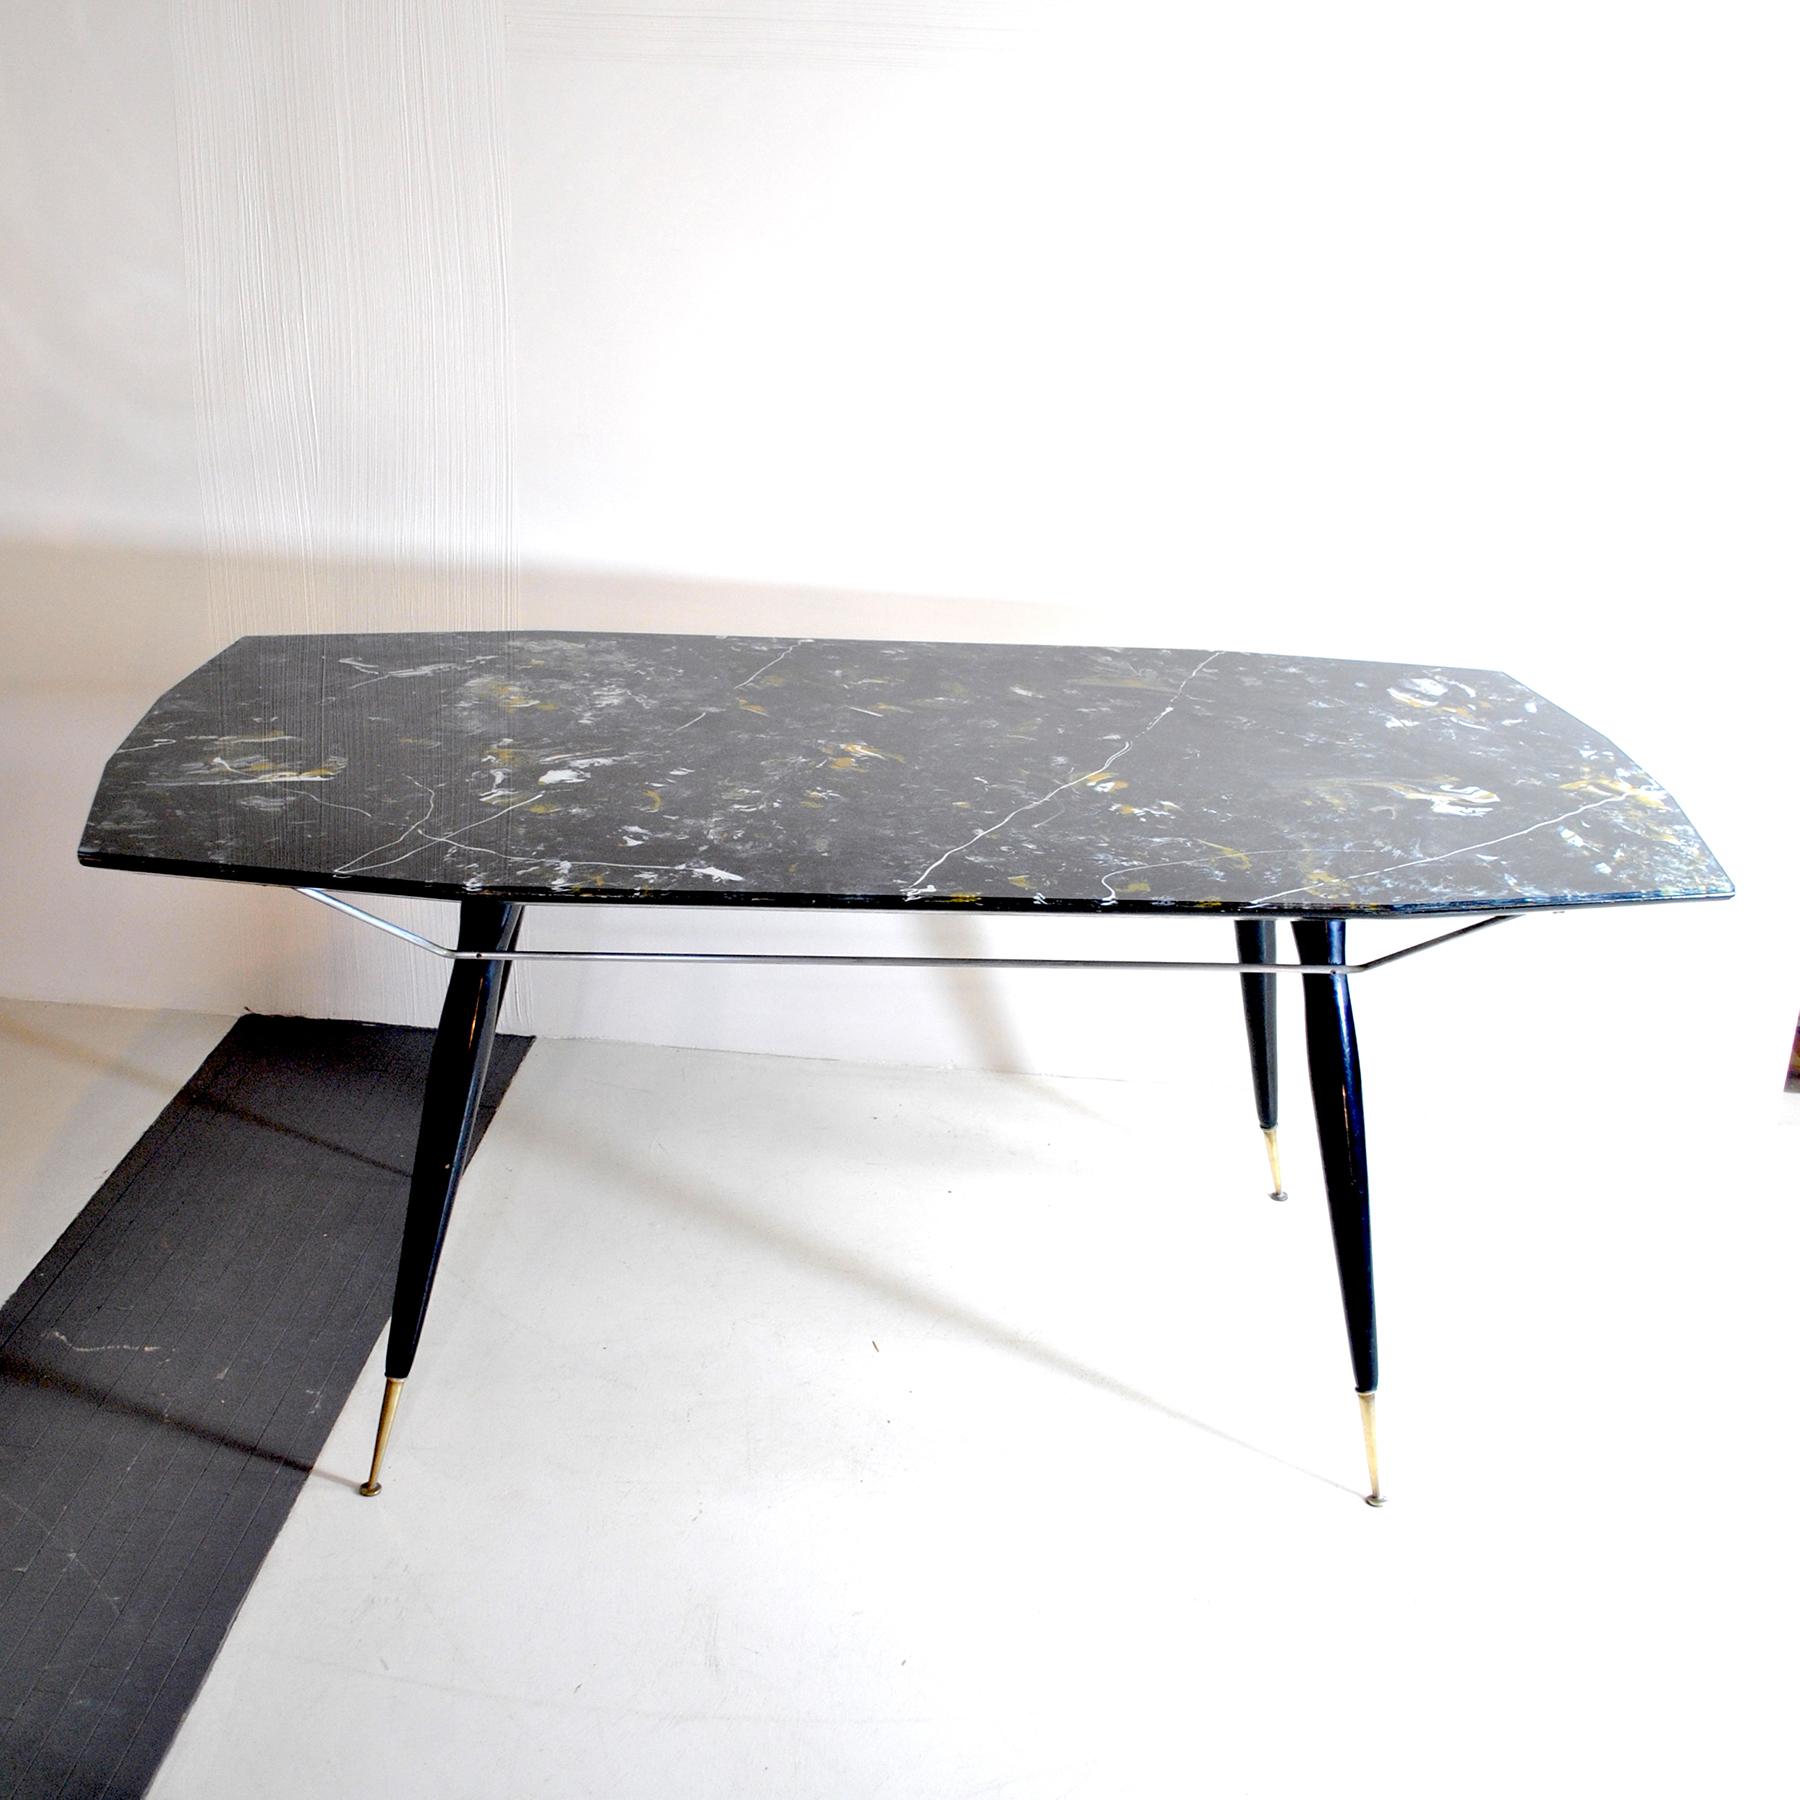 Table with feet in wood and terminal in brass, on top molded restro glass depicting black Carrara marble.
Although not attributed to any designer of the time, the table has many features that lead one to think it might be by some designer. From the